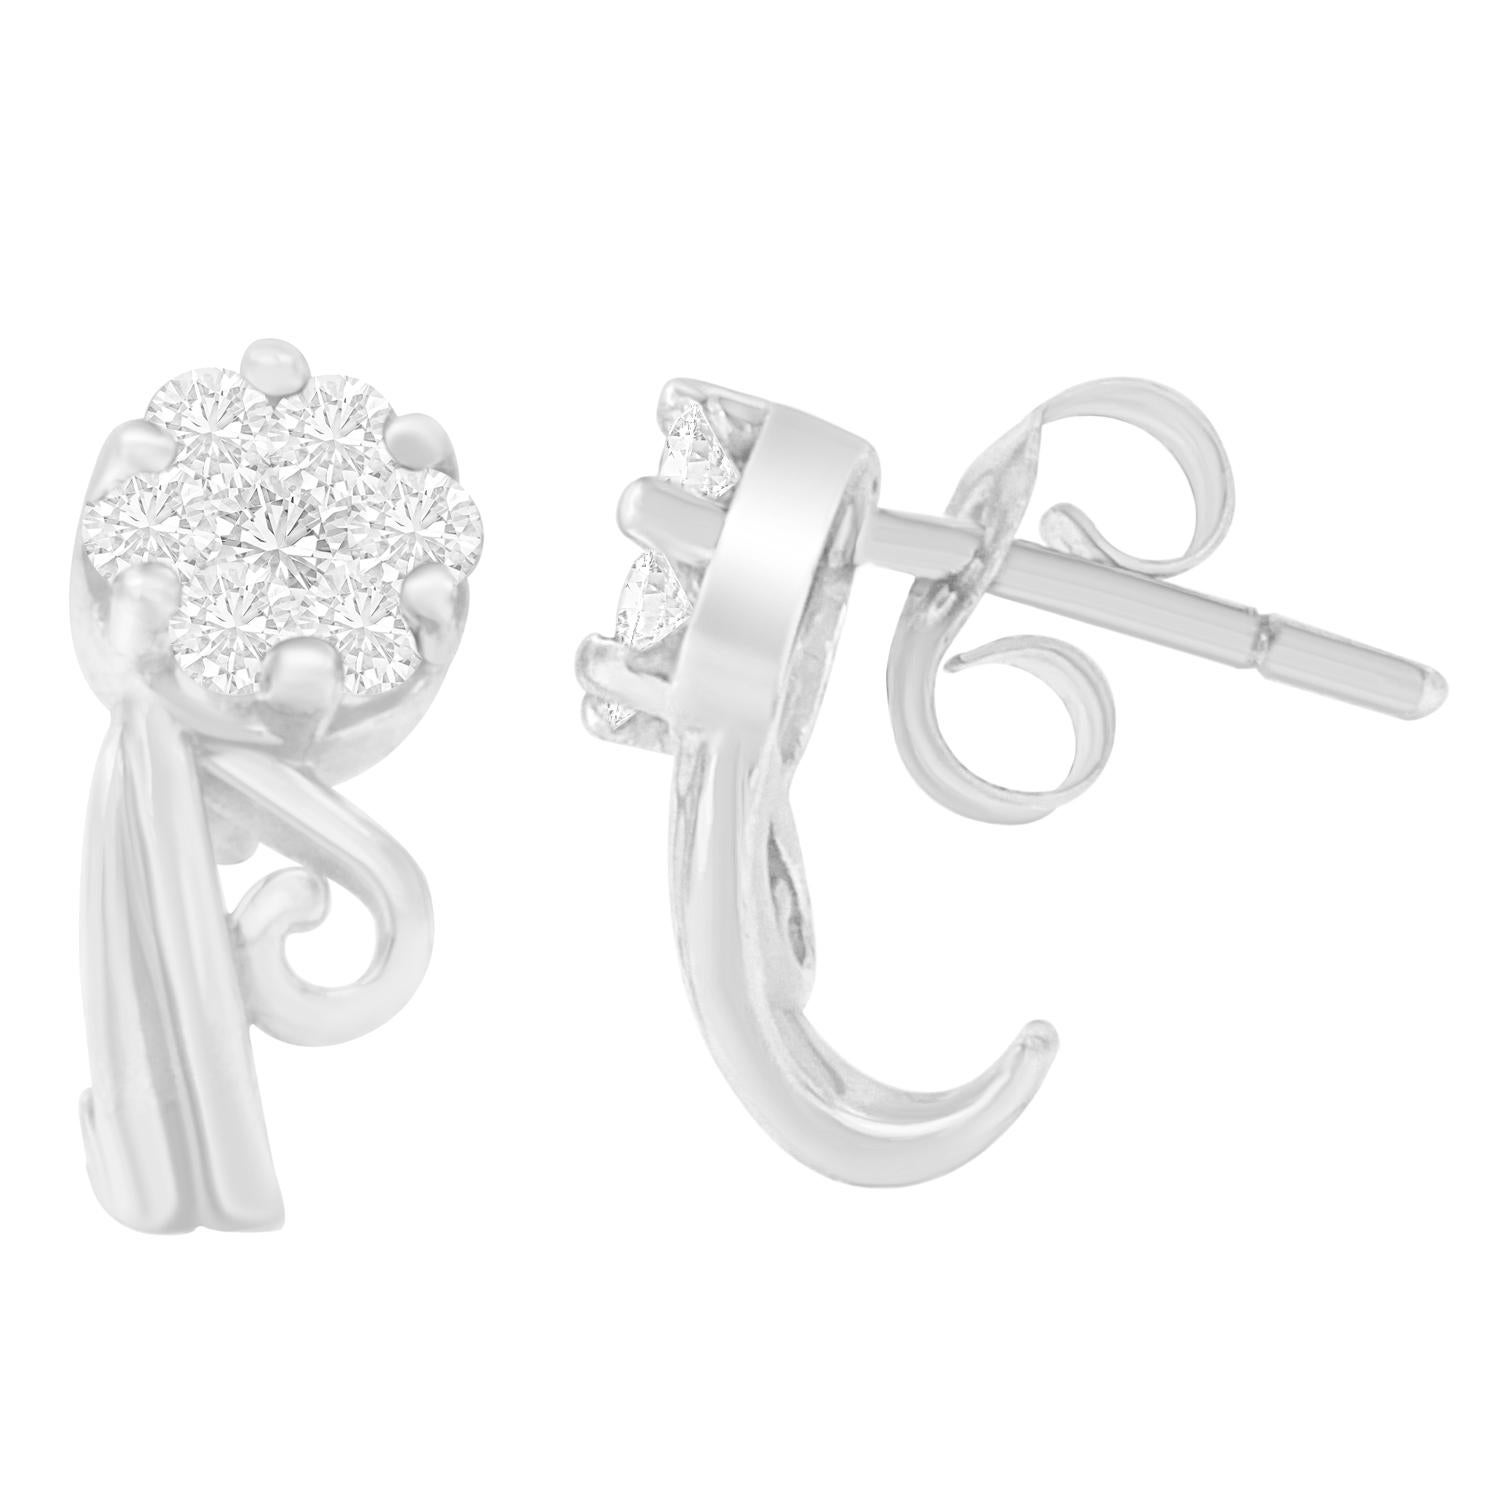 Touch the new heights of your love life by giving her these beautiful earrings. Designed with elegance by giving attention to every detail, the earrings are created with 14 karats white gold. Featuring a unique design, the earrings are ornate with